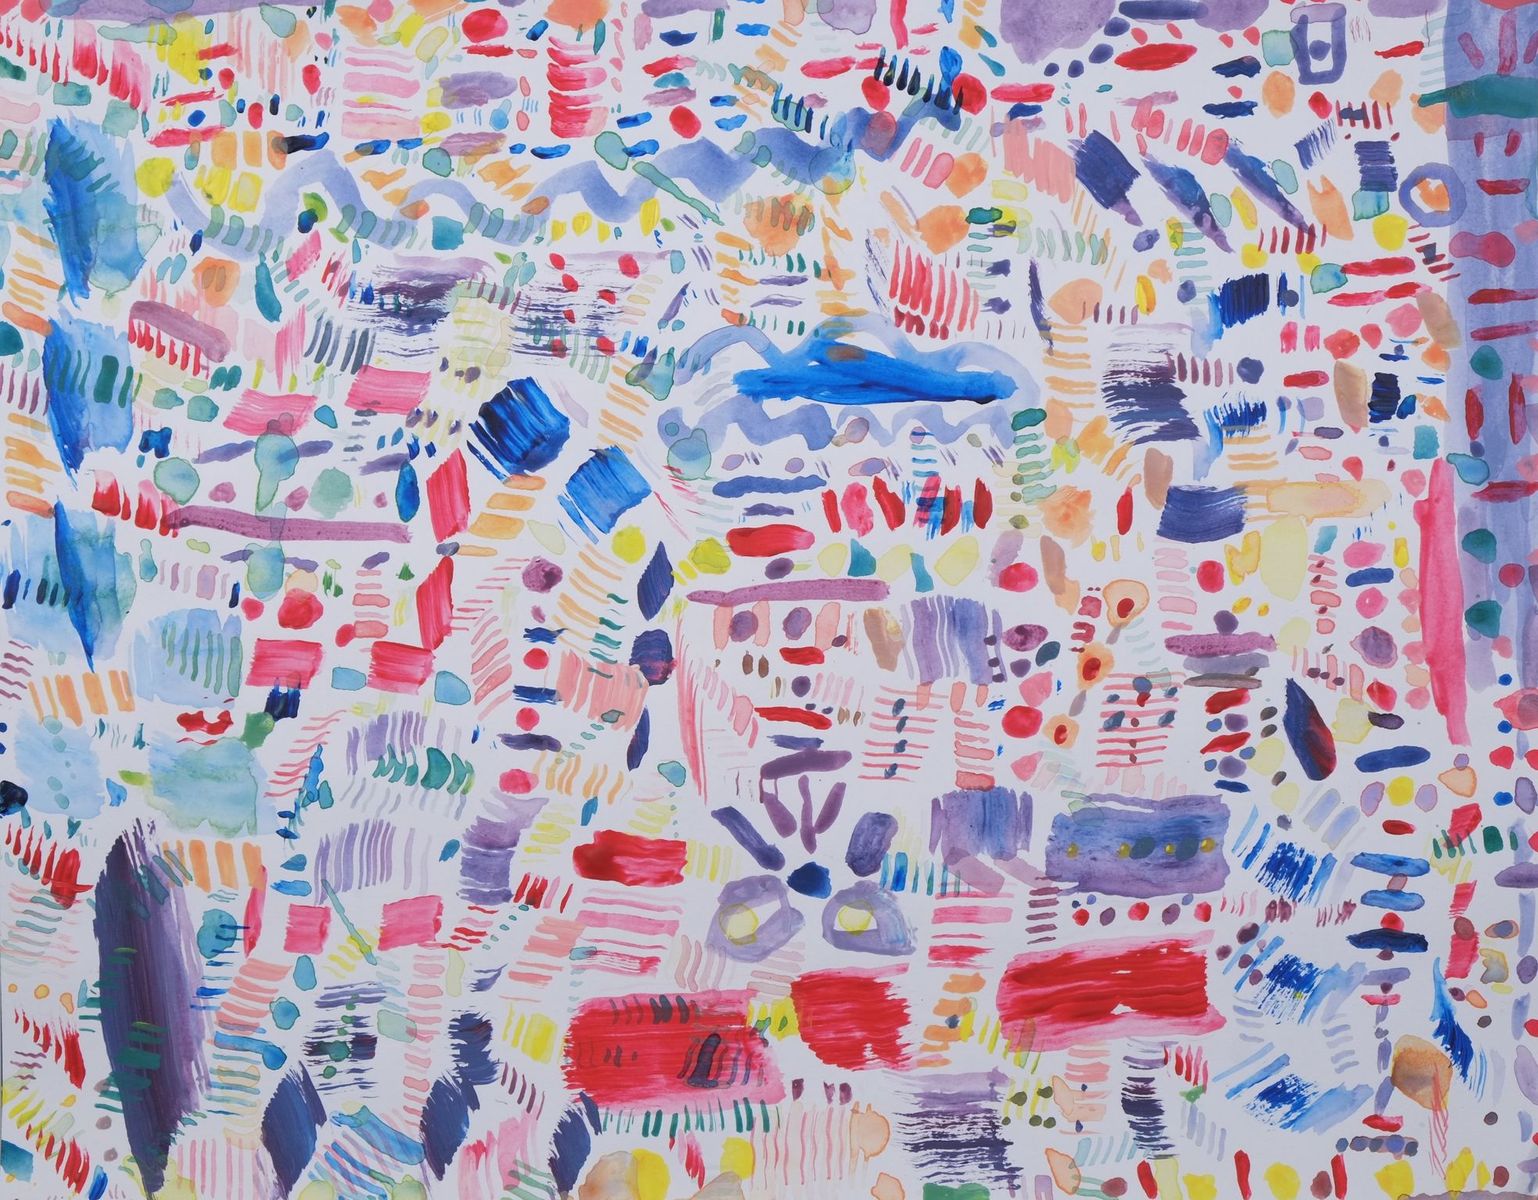 Acrylic on paper artwork on a mostly white background with varying patterns of splotches, dots and tiny lines in colors of light blue, pink, red, yellow and dark blue